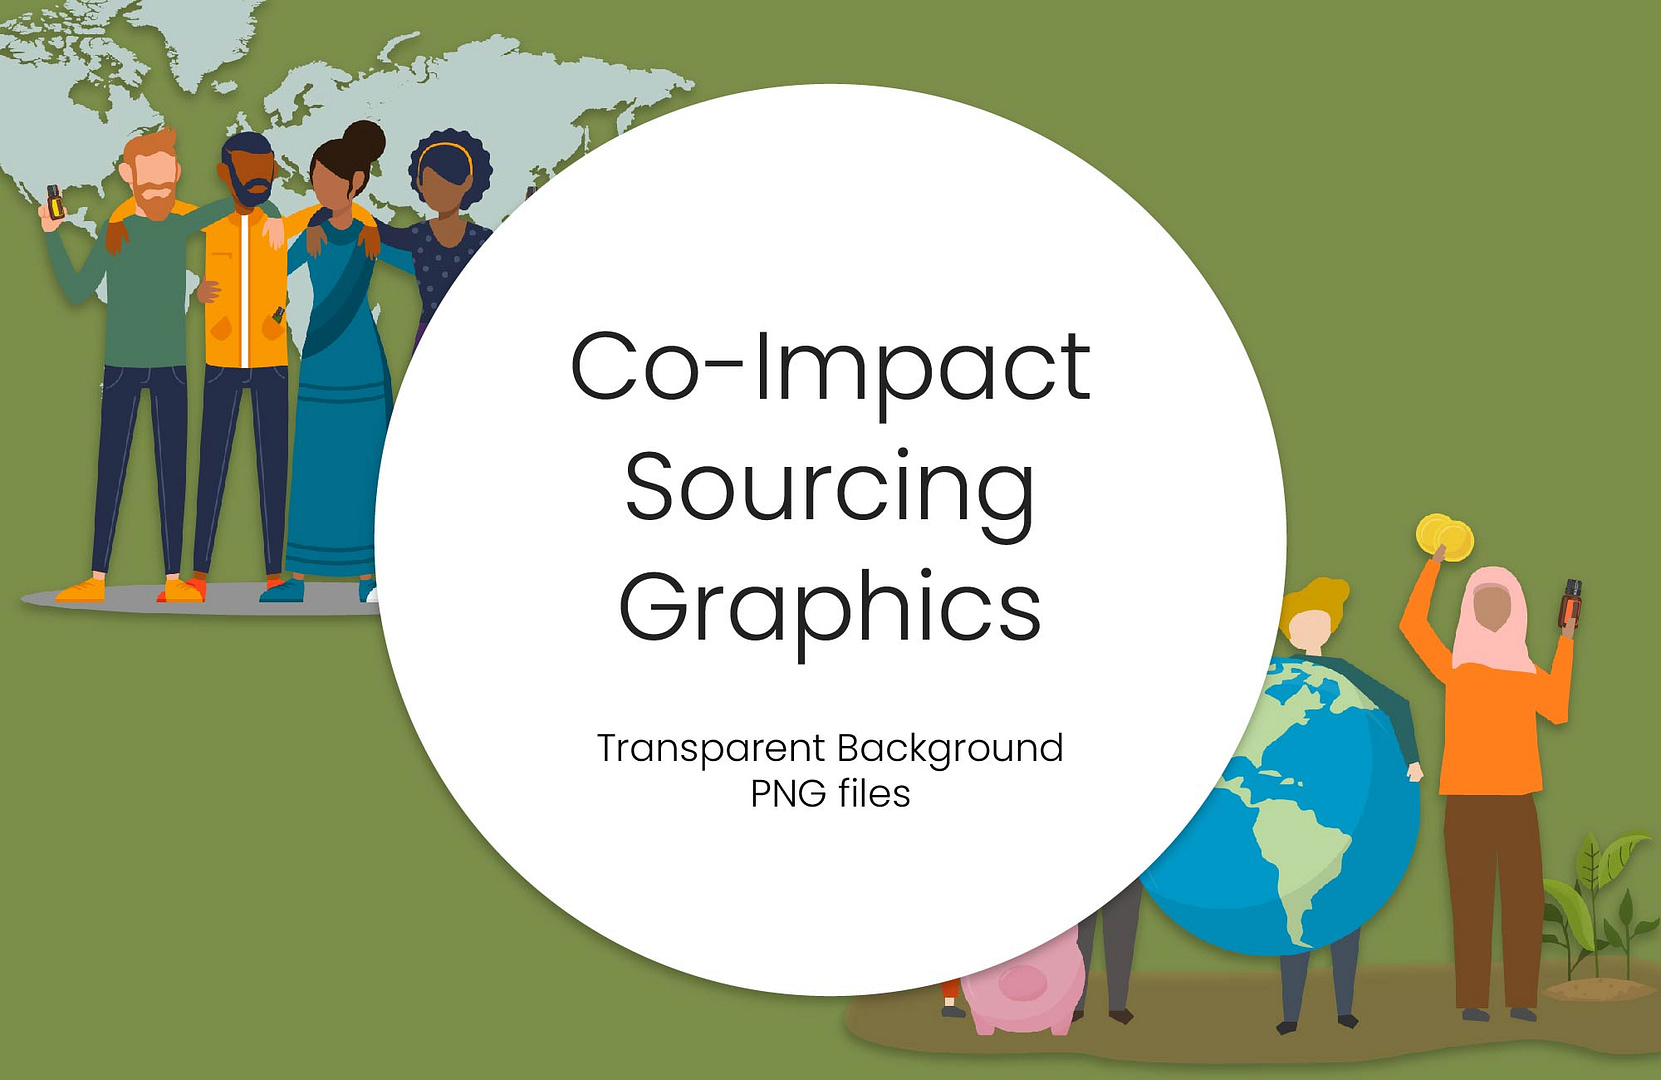 doTERRA Co-Impact Sourcing Graphics - Essential Oil Graphics - doTERRA Essential Oils